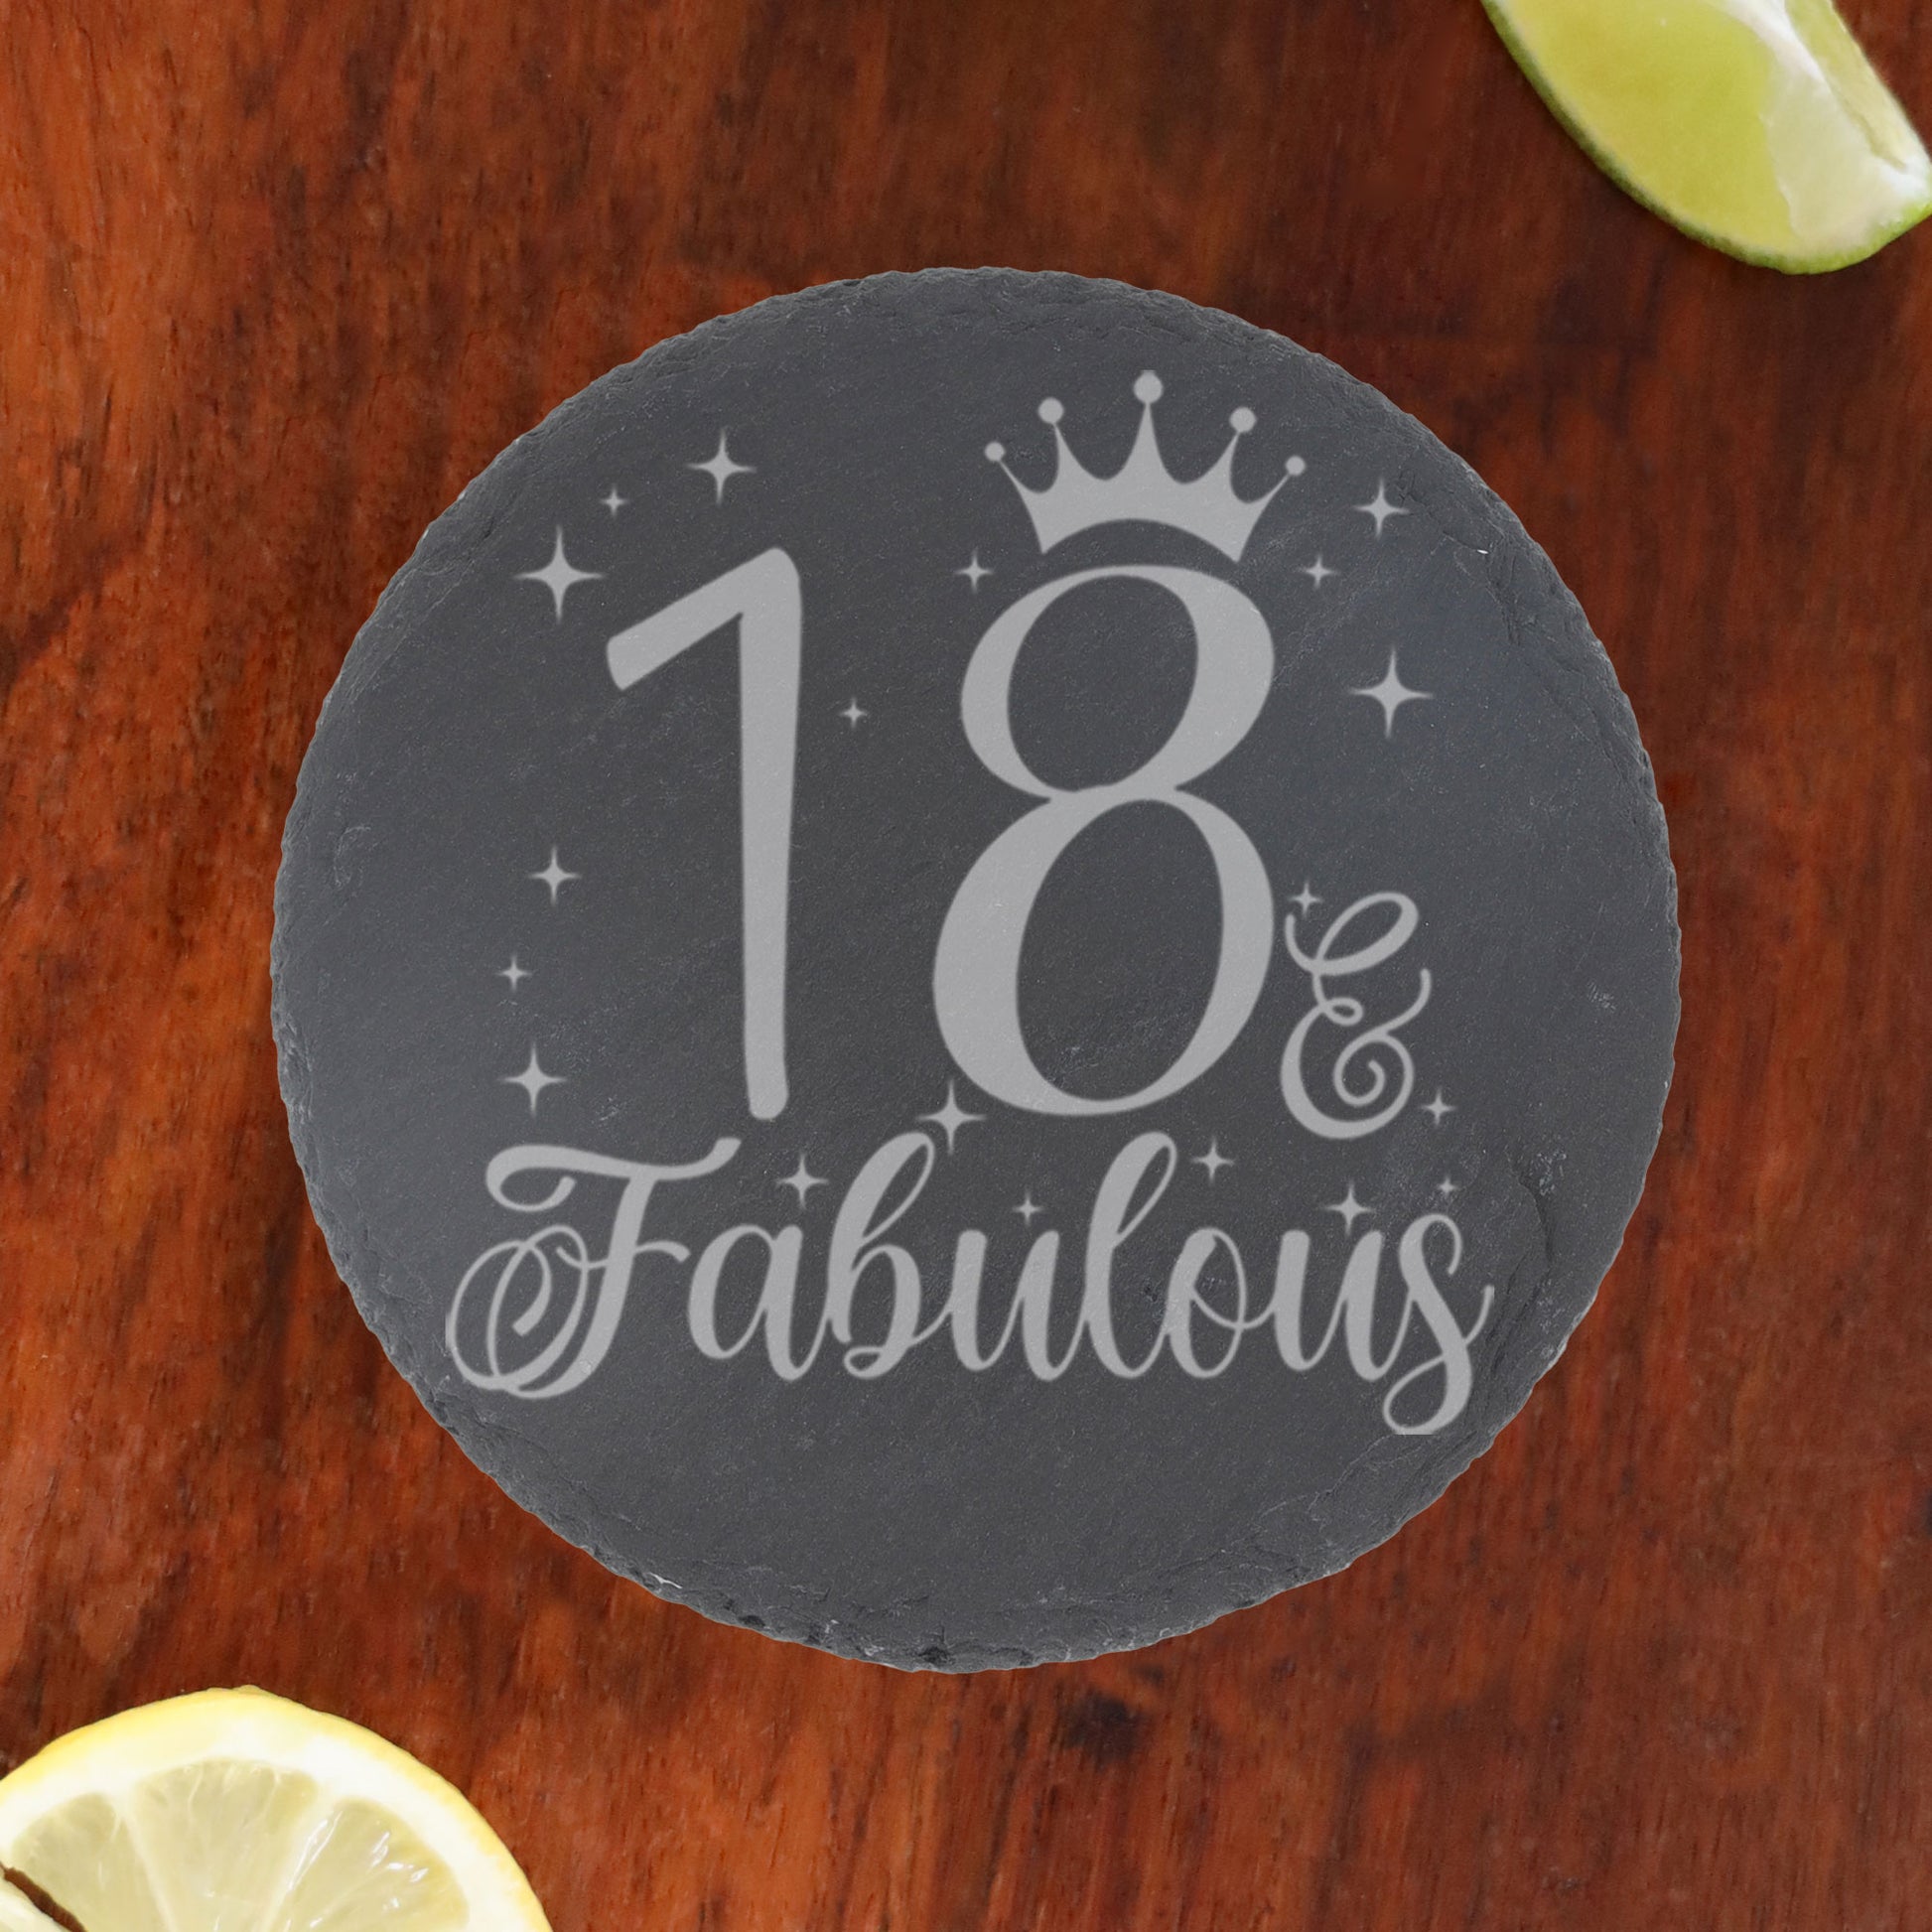 18 & Fabulous 18th Birthday Gift Engraved Wine Glass and/or Coaster Set  - Always Looking Good - Round Coaster Only  